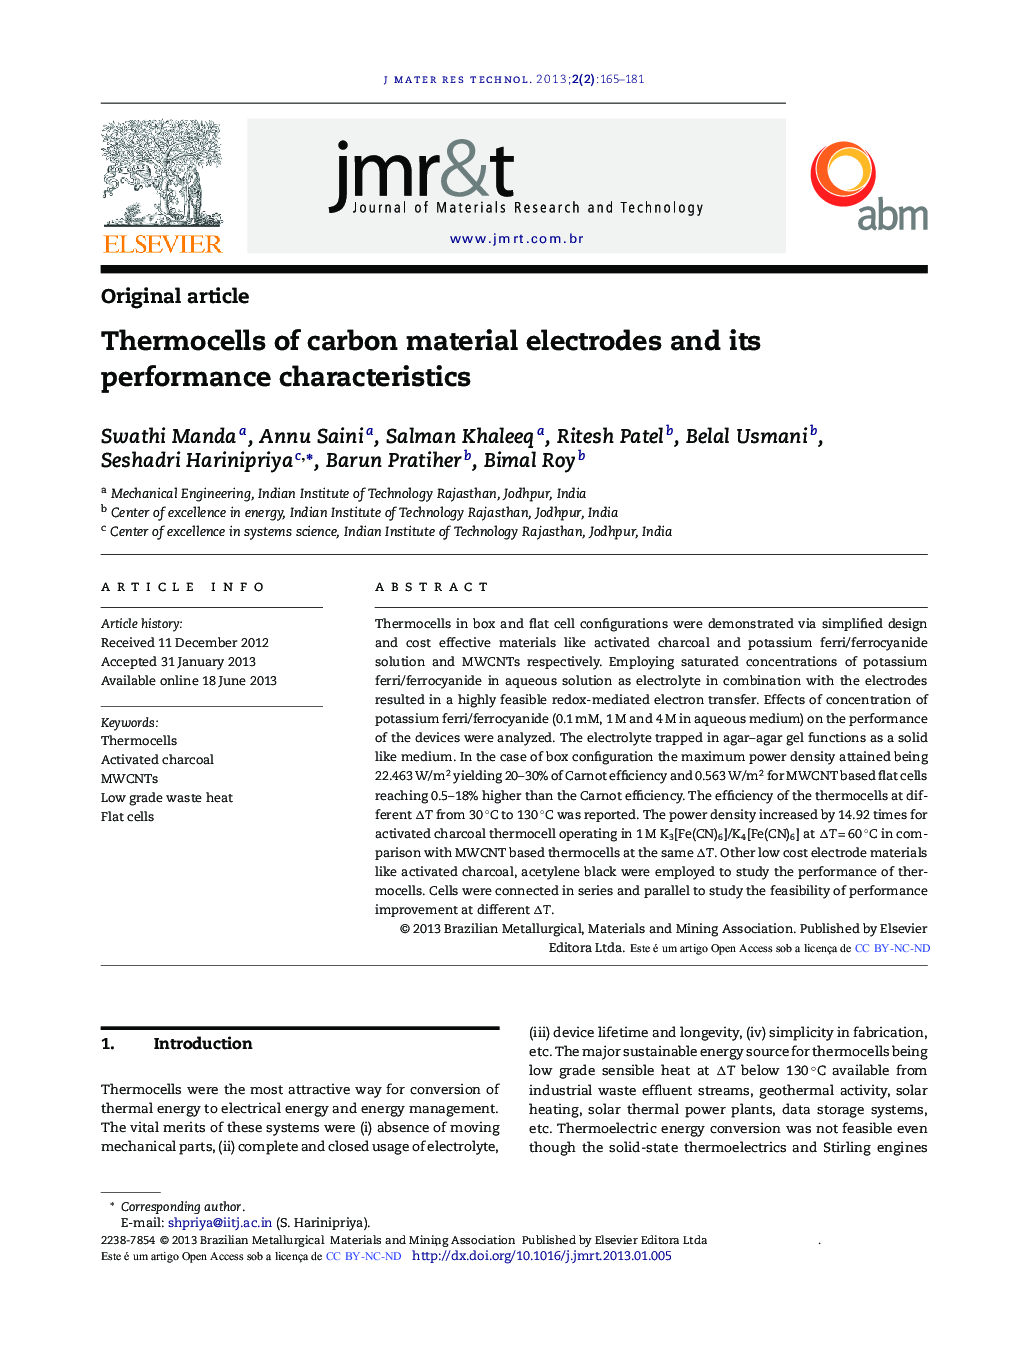 Thermocells of carbon material electrodes and its performance characteristics